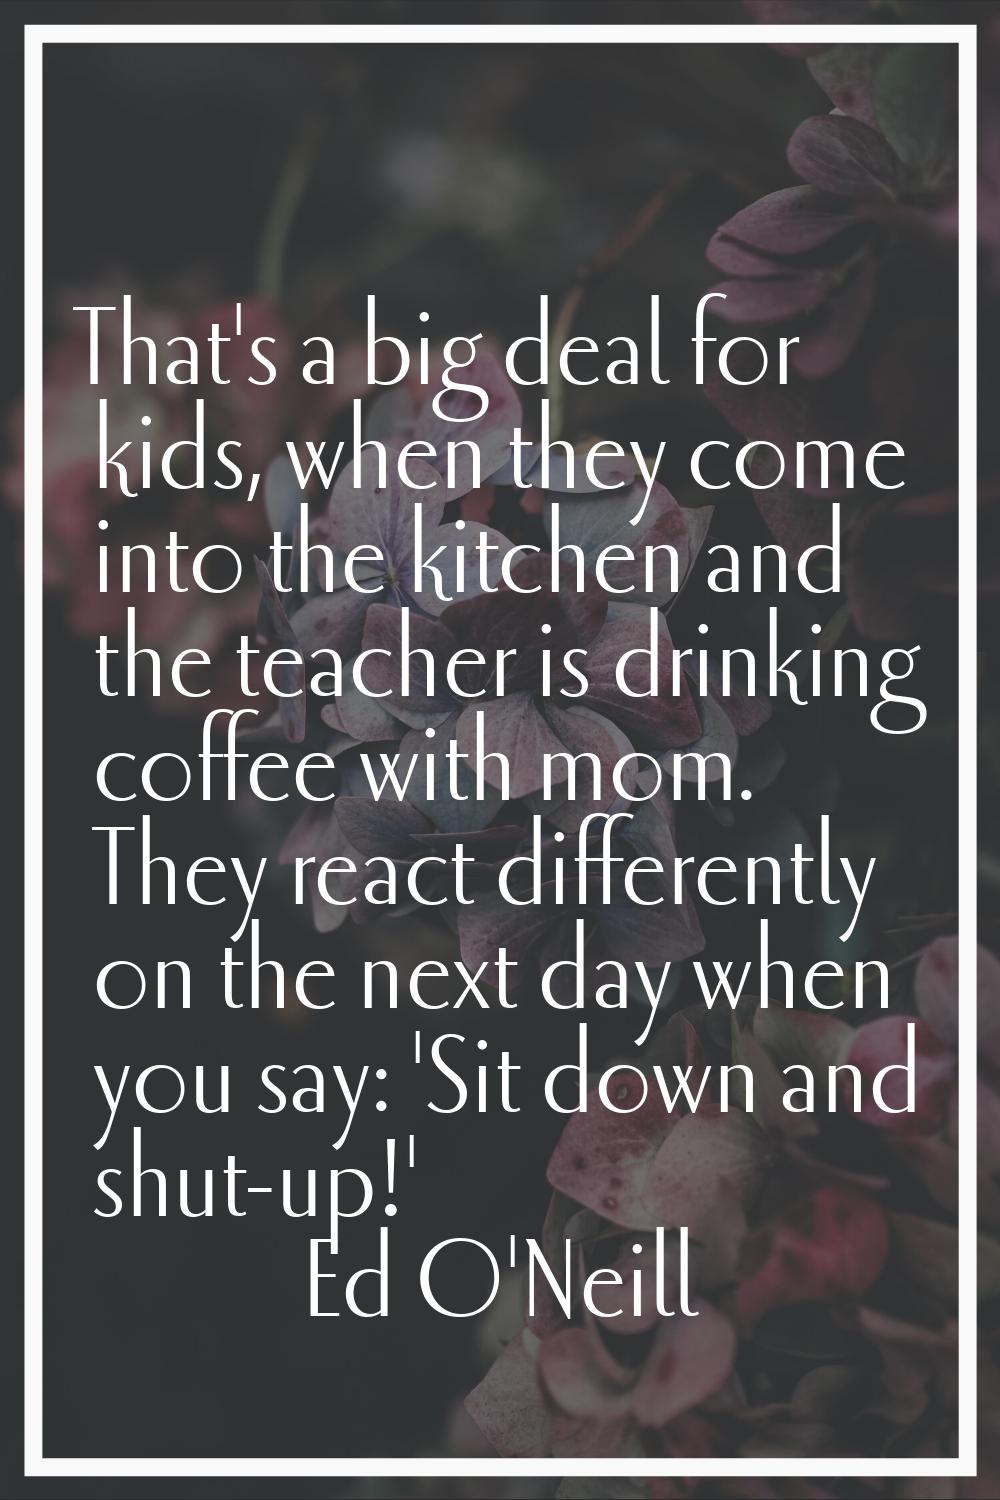 That's a big deal for kids, when they come into the kitchen and the teacher is drinking coffee with